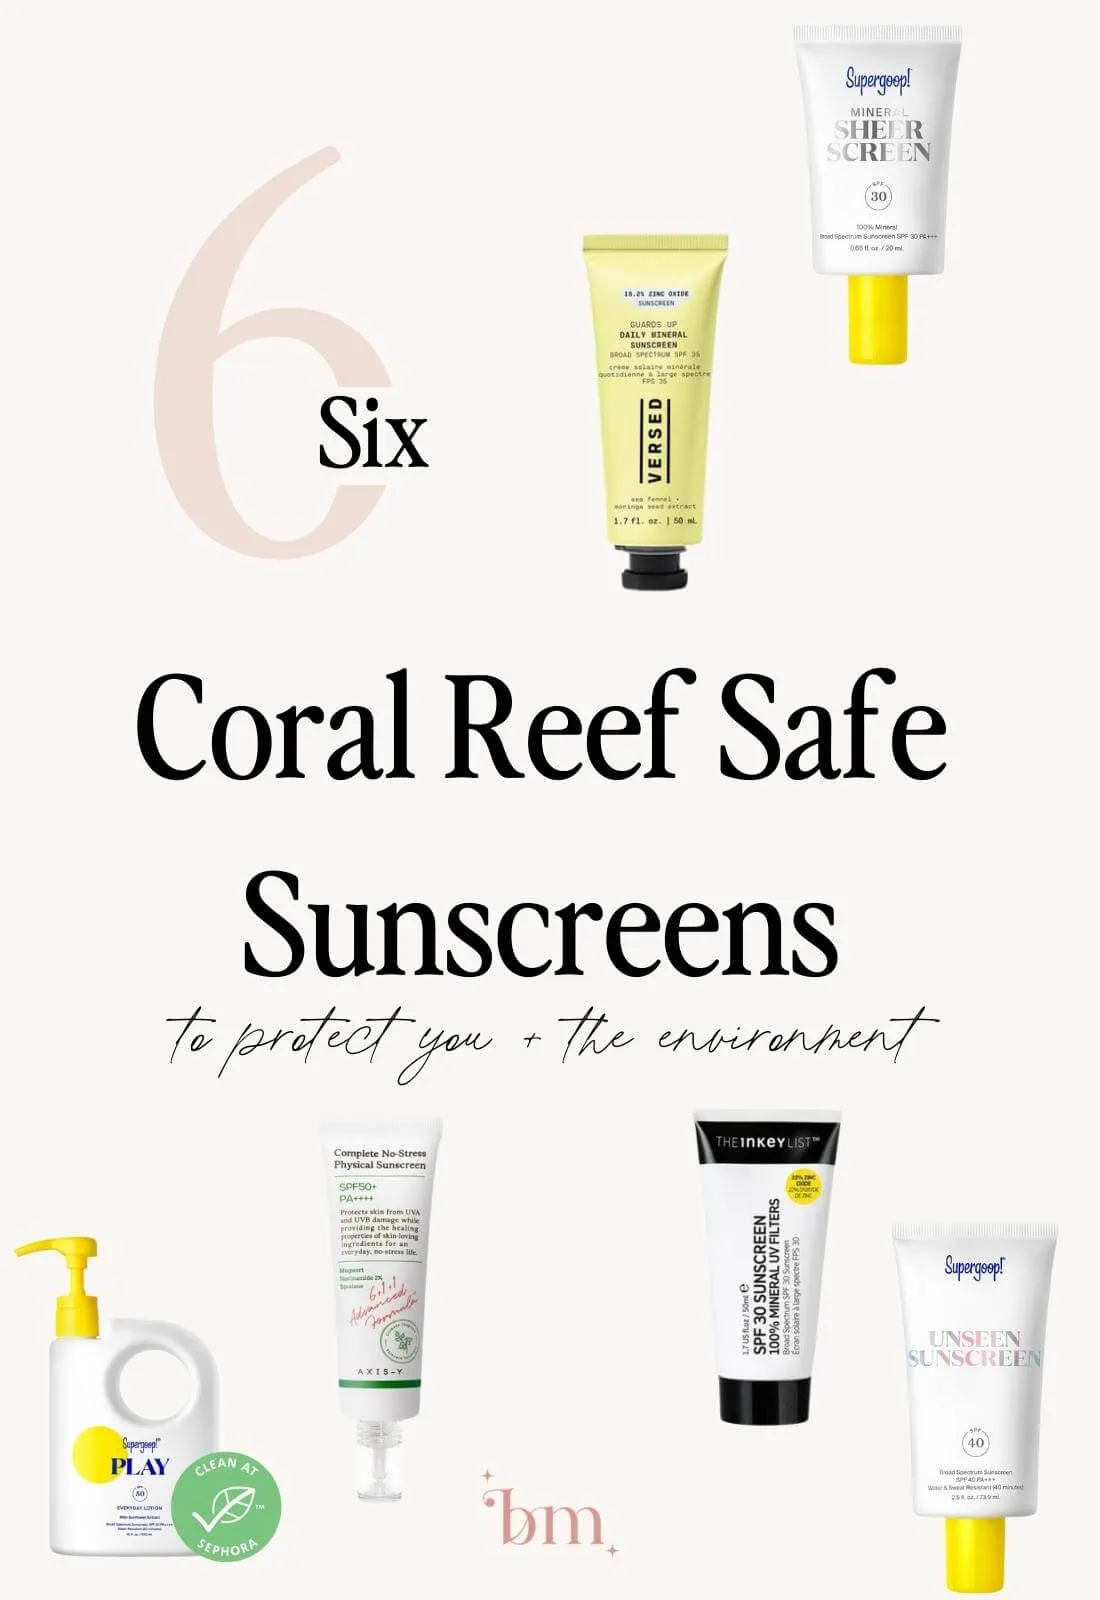 Coral Reef Safe Sunscreens